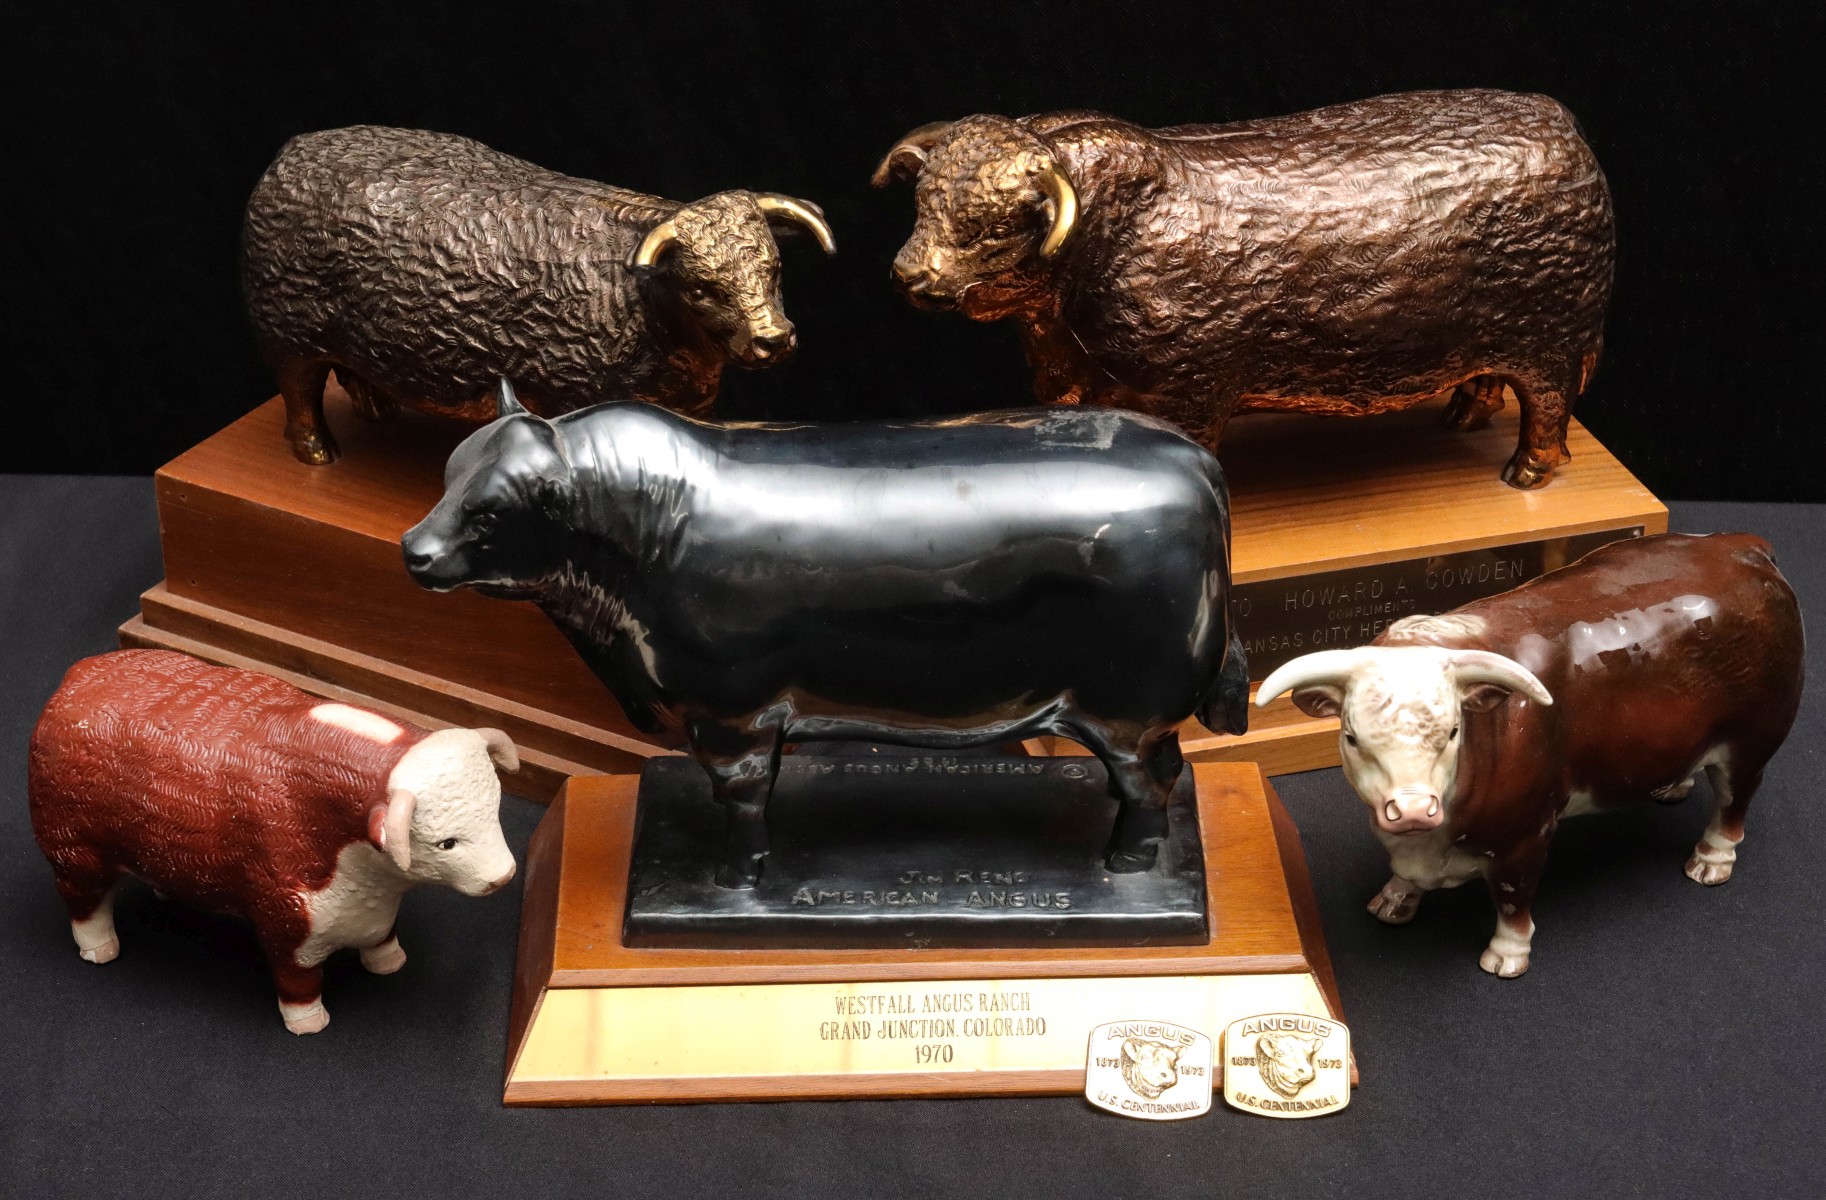 KANSAS CITY HEREFORD CLUB STATUES AND FIGURES